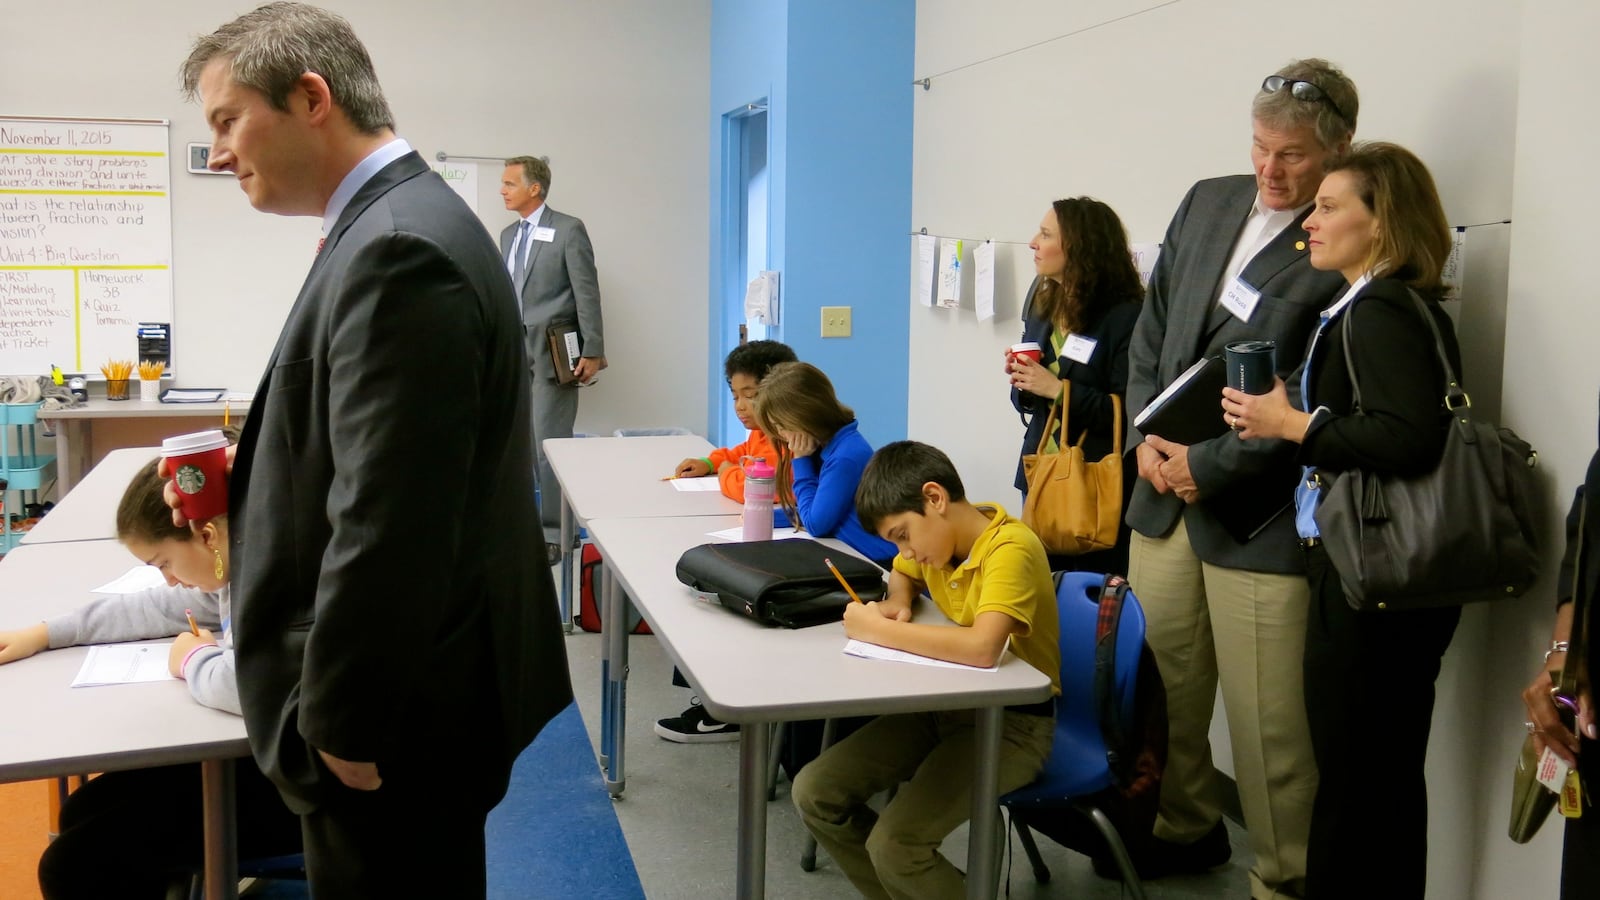 Sen. Jeff Yarbro observes a math class at Valor Voyager, one of the Valor Collegiate Academies on the same campus, with MNPS School Board member Mary Pierce and Councilman Russ Pulley looking on.